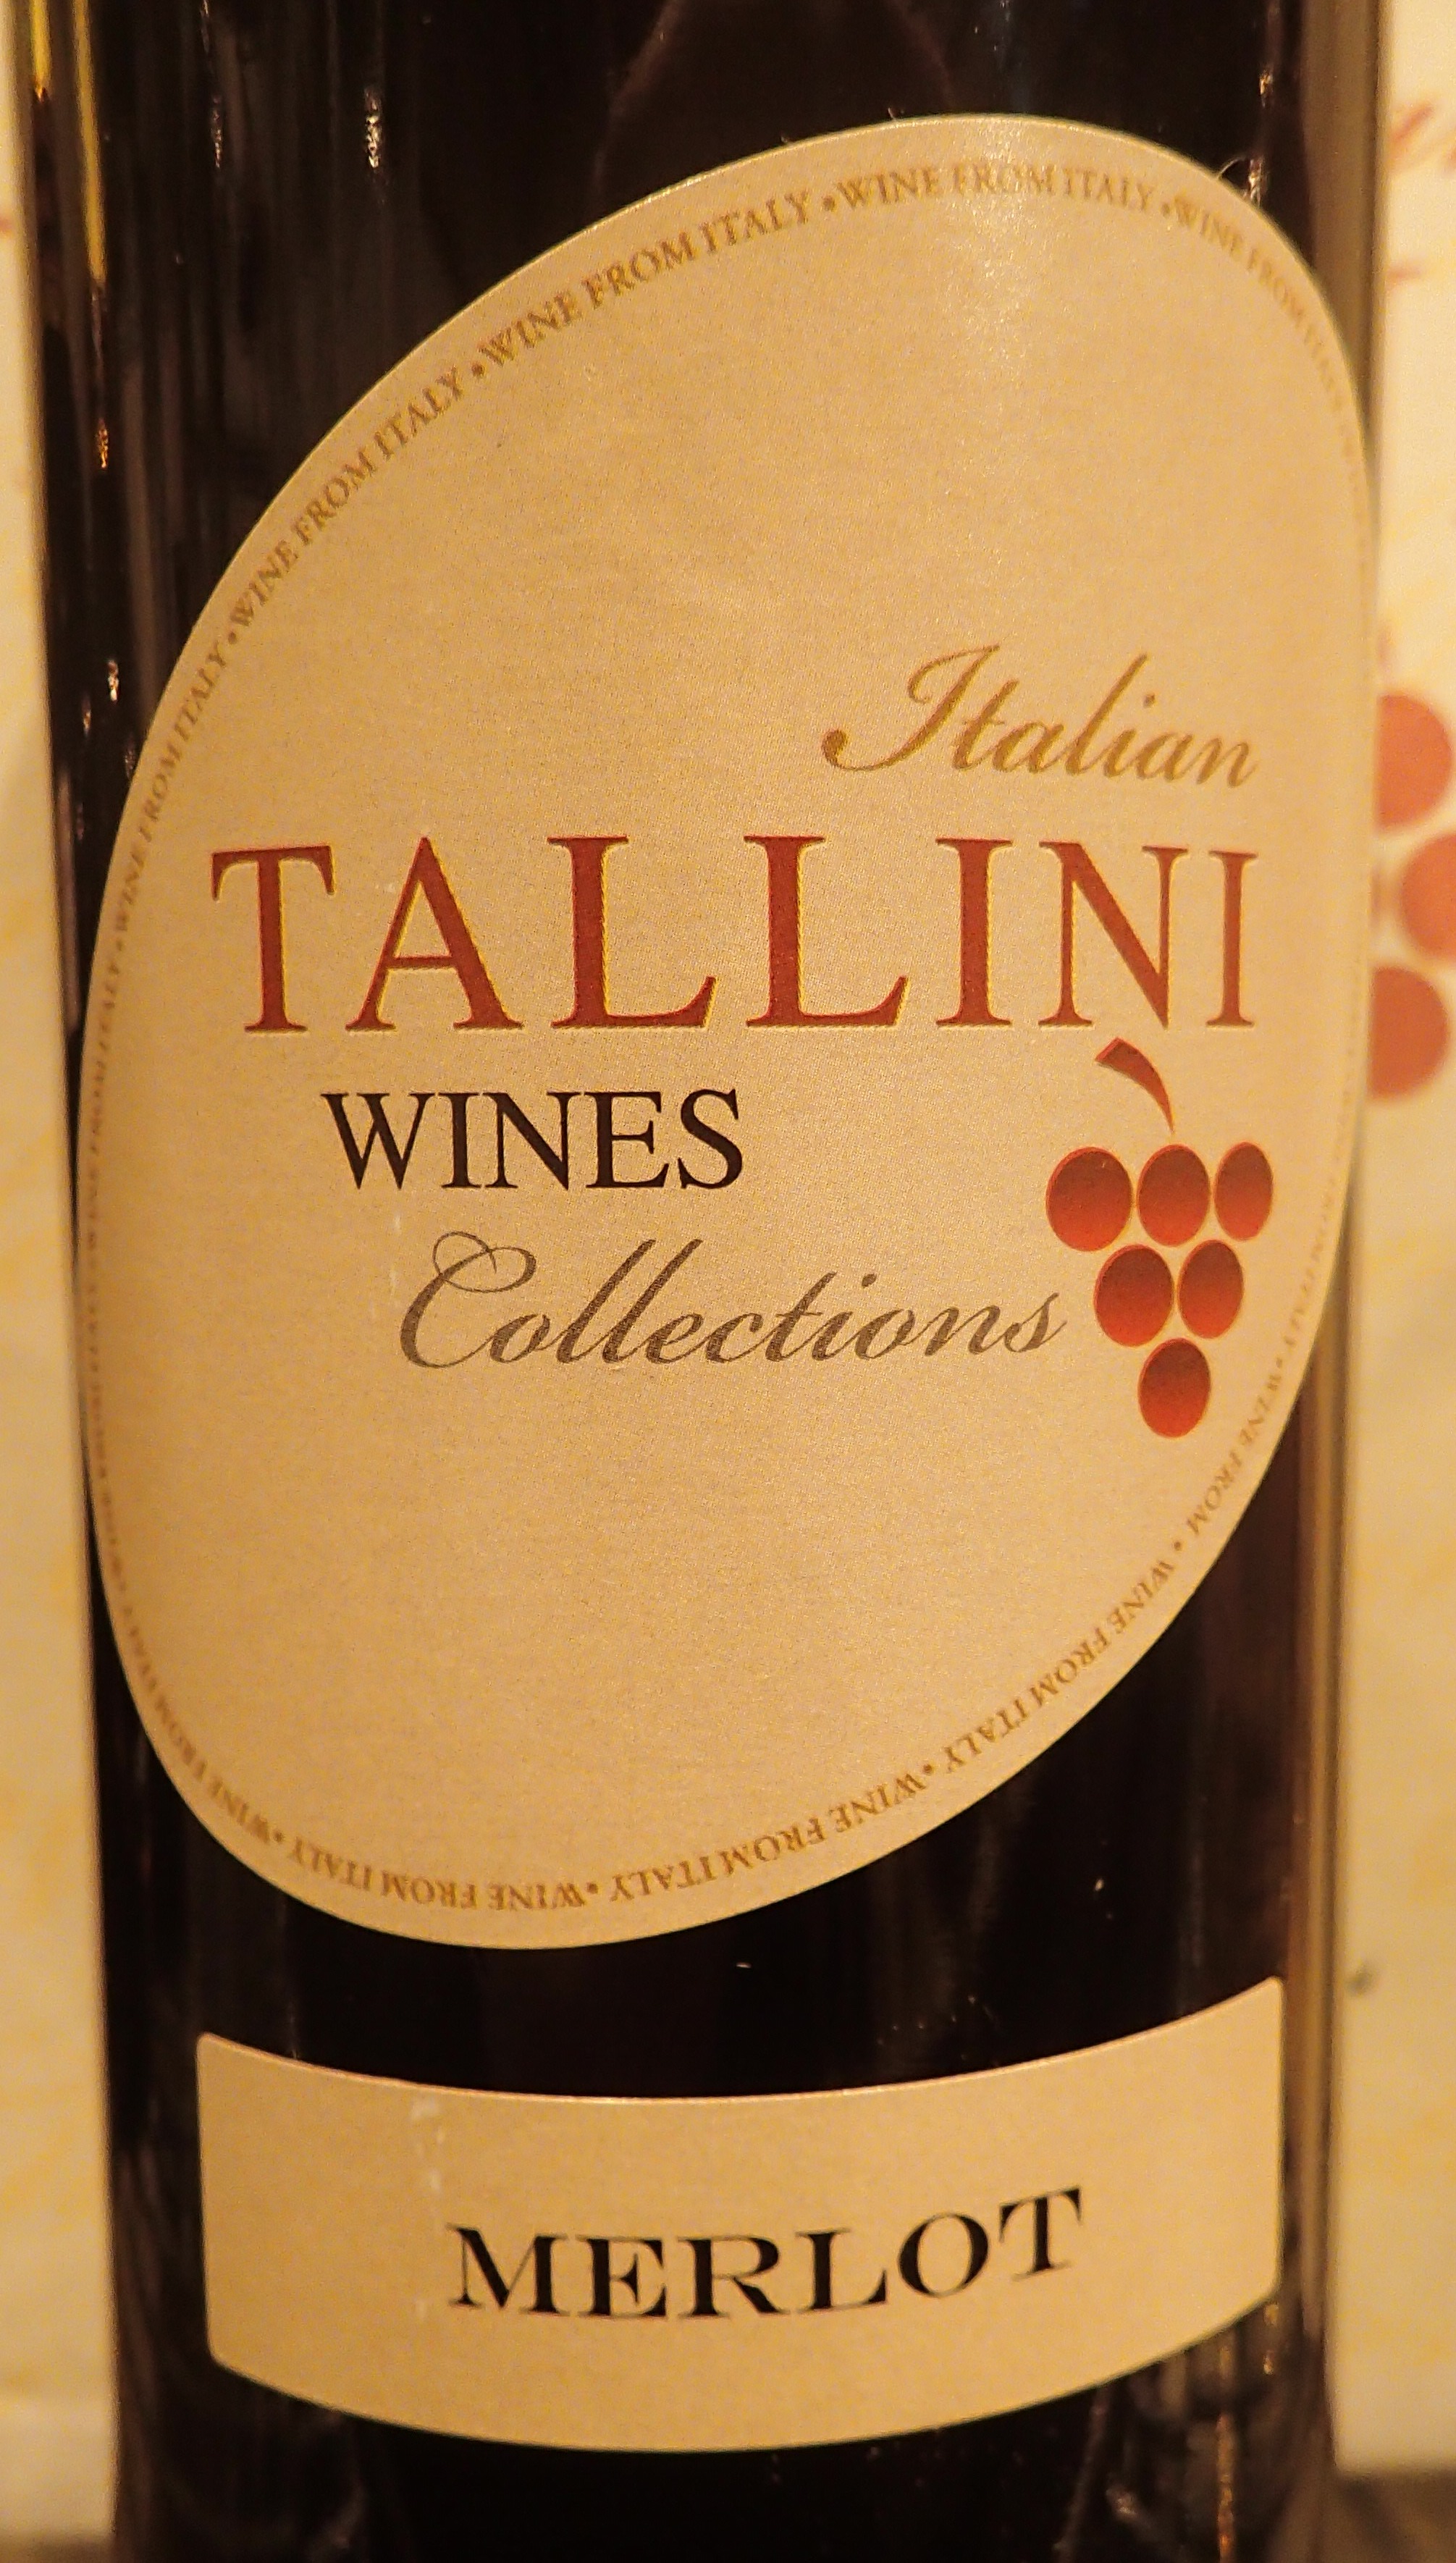 Case of six bottles of Italian Tallini Merlot wine CONDITION REPORT: We are unable